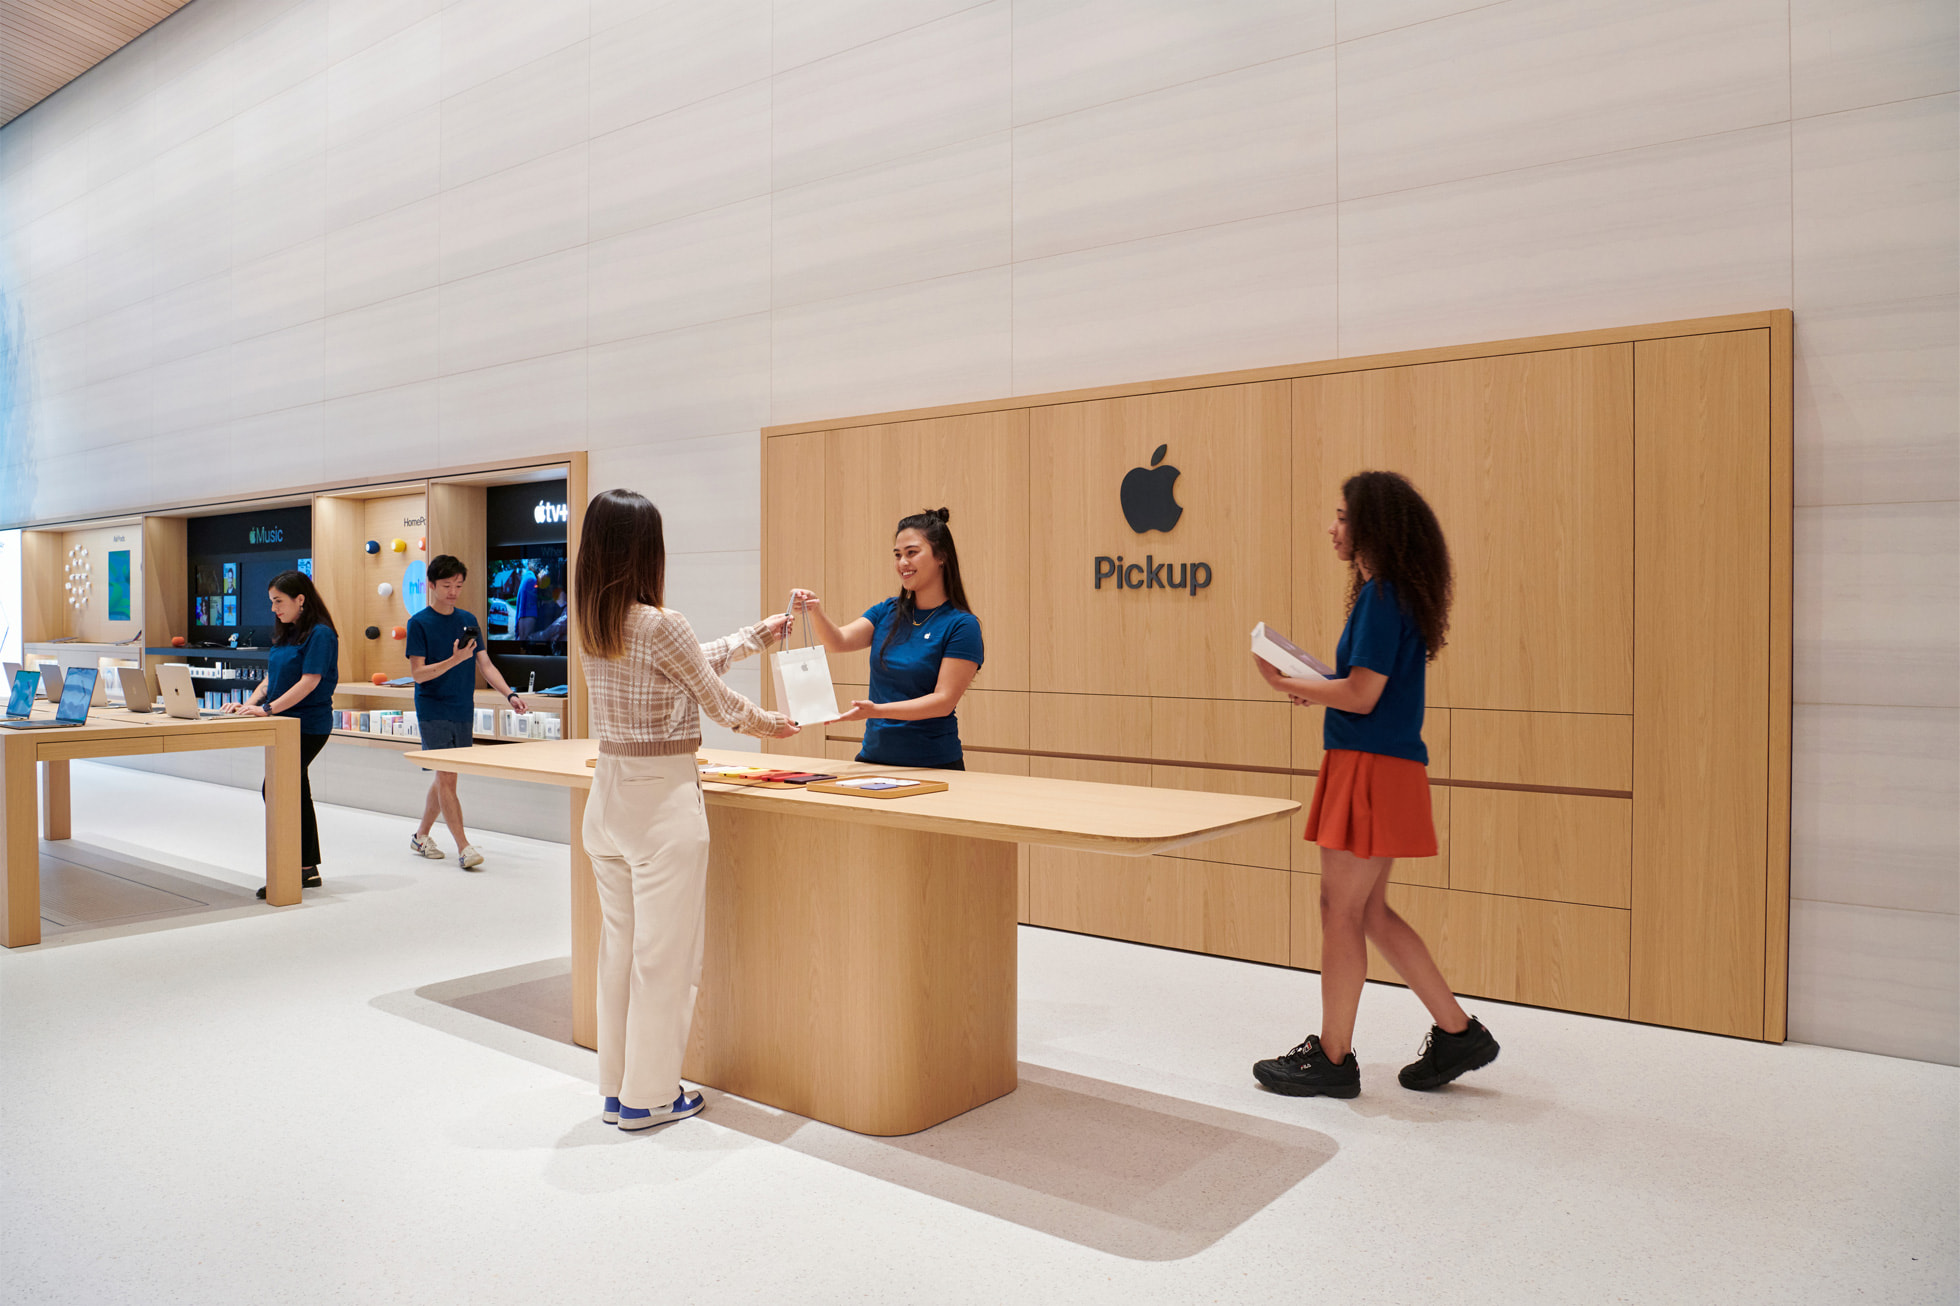 Apple Brompton Road is the first Apple store location in the UK with a dedicated Apple Pickup area.